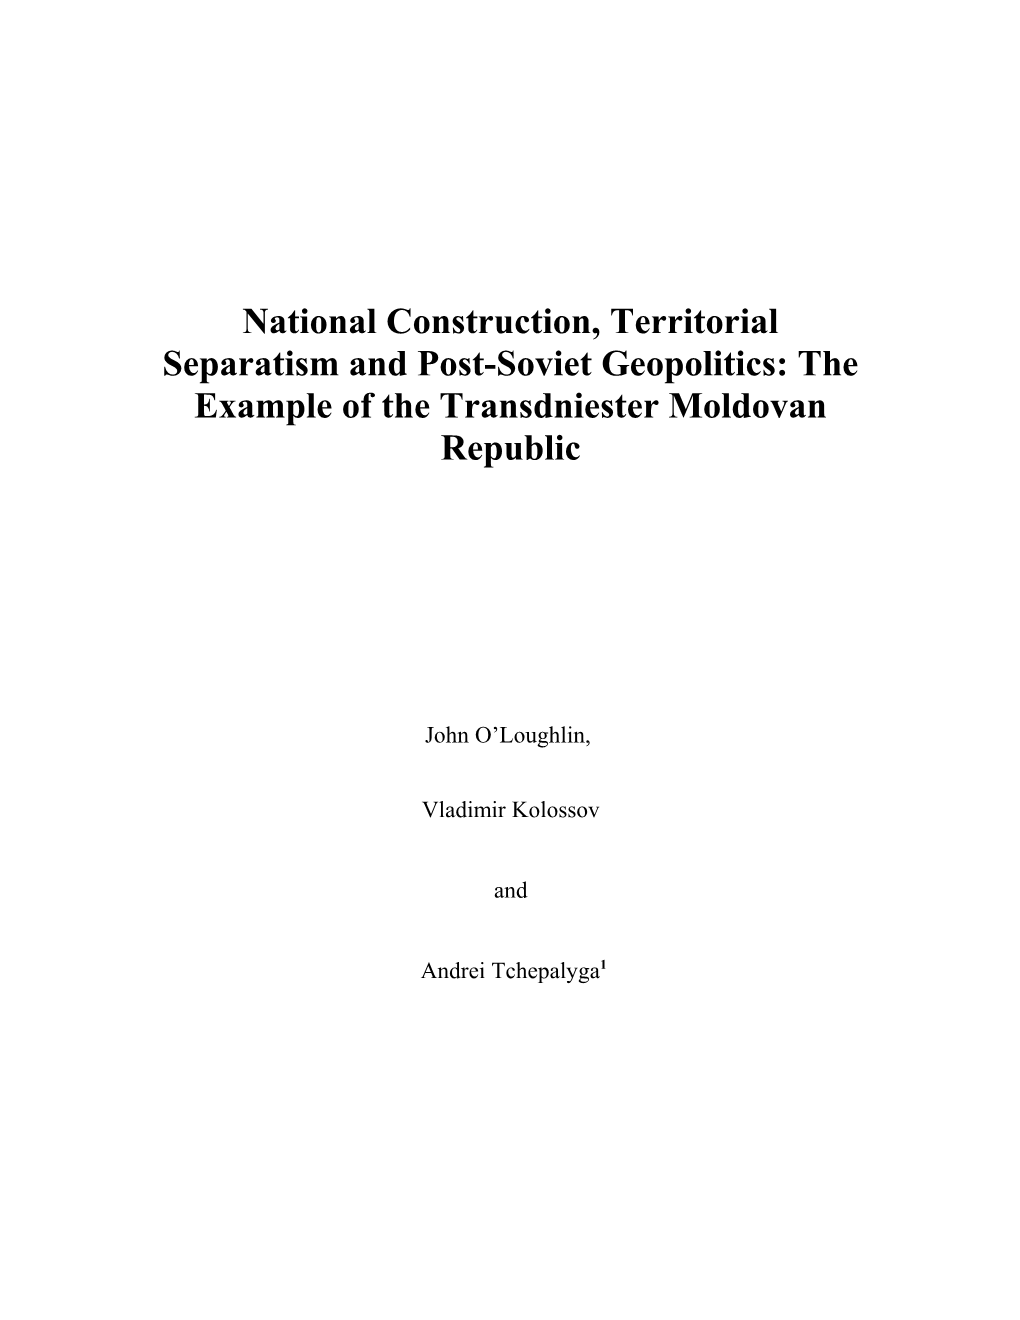 National Construction And Post-Soviet Geopolitics: The Example Of The Transdniester Moldovan Republic